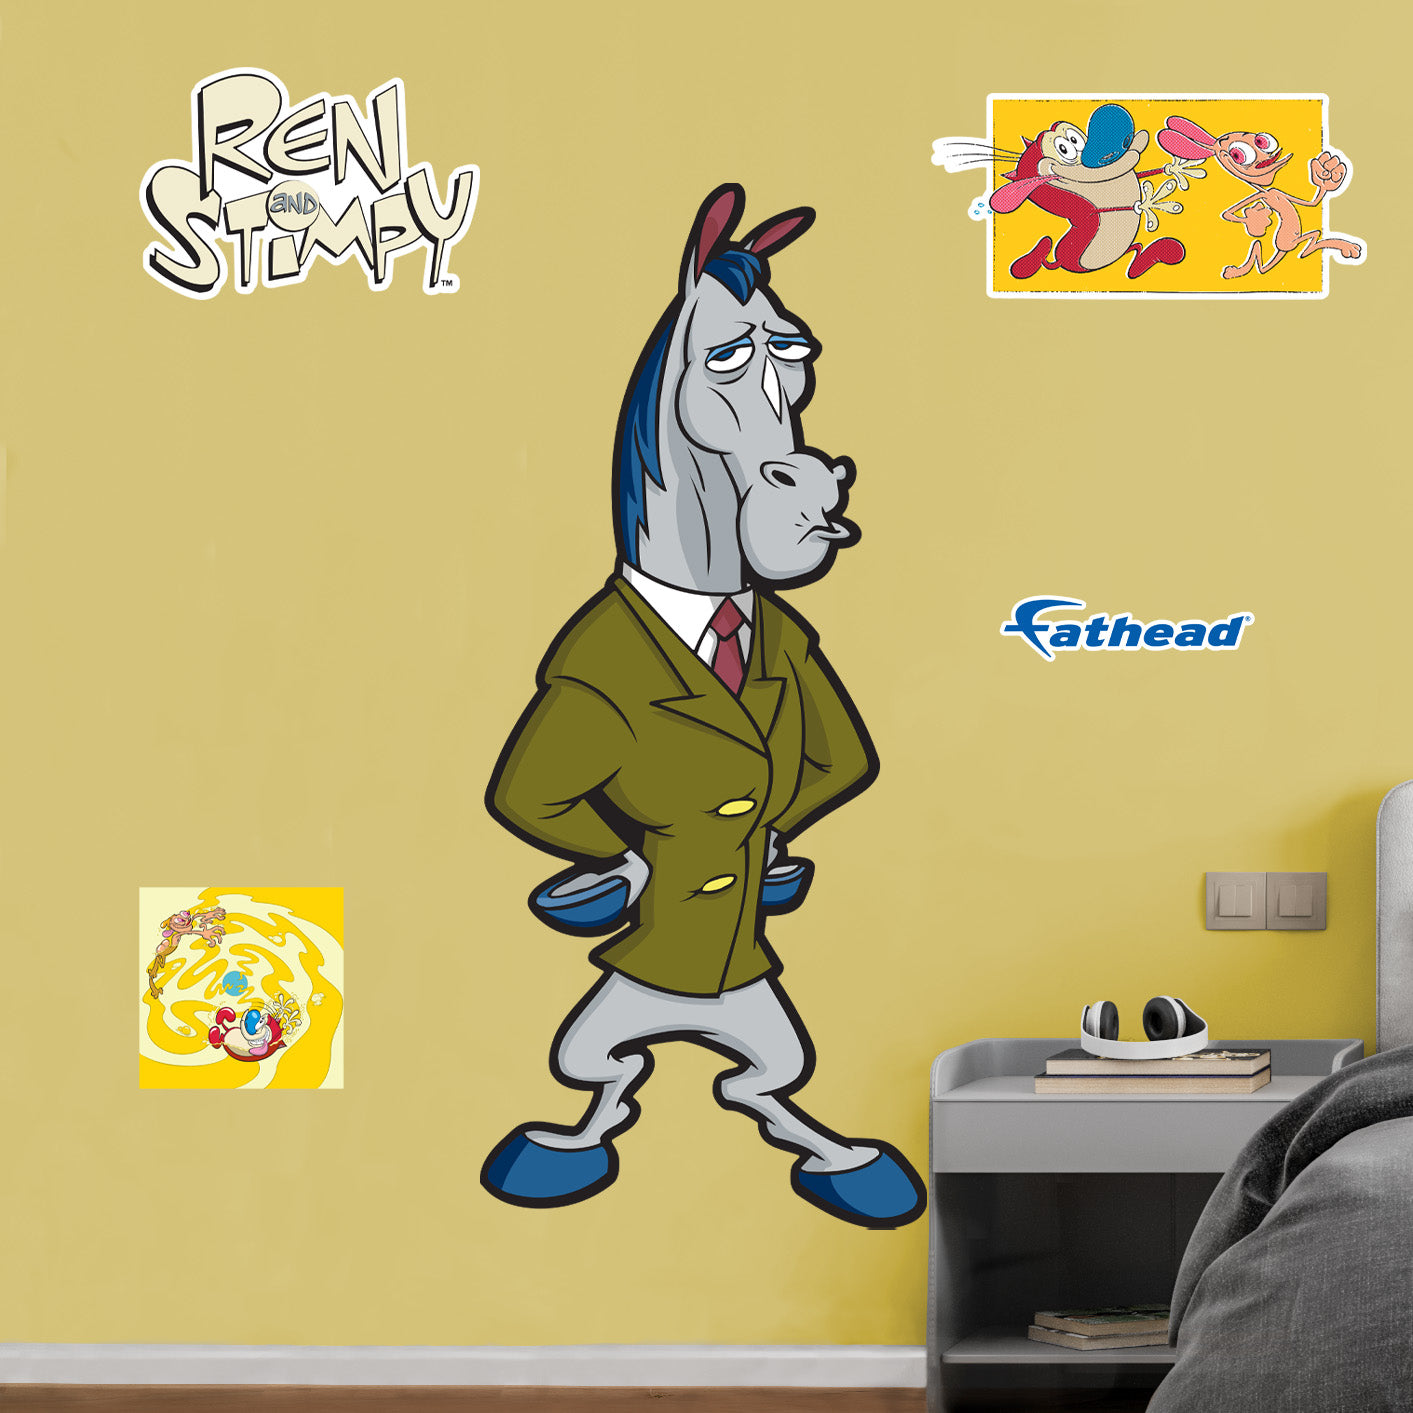 Ren and Stimpy: Mr. Horse RealBig - Officially Licensed Nickelodeon Removable Adhesive Decal